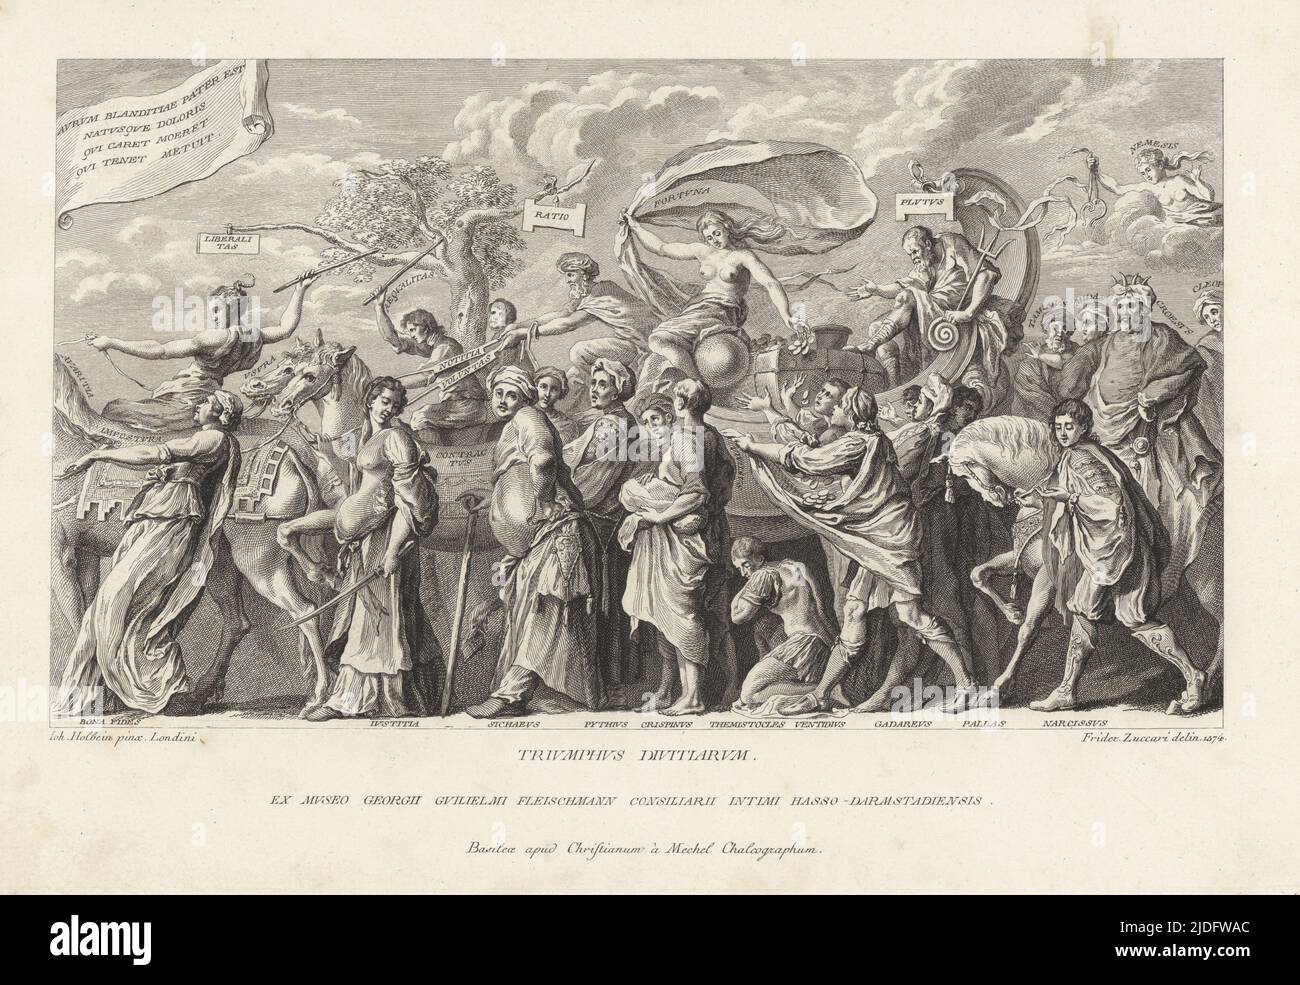 The Triumph of Wealth, procession of allegorical figures of the rich. Fortune and Pluto ride a carriage drawn by Avarice, Imposture, Usury, etc. Followed by Croesus, Midas, Cleopatra, Justice, Pallas, Pythius, Crispinus, etc., while Nemesis watches from a cloud. Triumphus Divitiarum. Copperplate engraving by Christian Mechel after a sketch by Federico Zuccari after a painting by Hans Holbein in Christian von Mechel's Oeuvre de Jean Holbein, Chez Guillaume Haas, Basel, 1790. Stock Photo